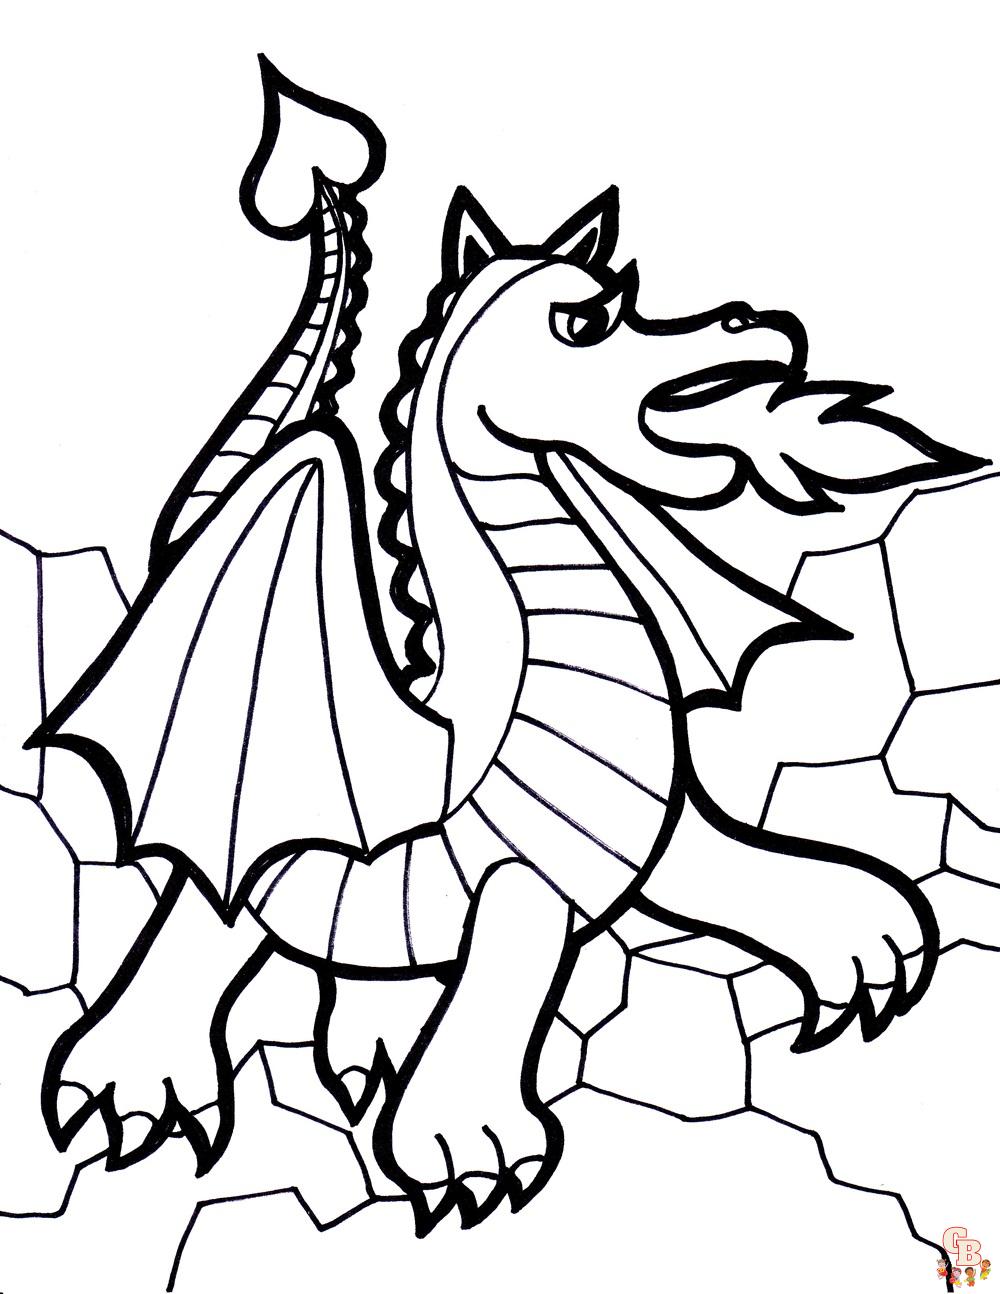 Dragon coloring pages to print for kids 7